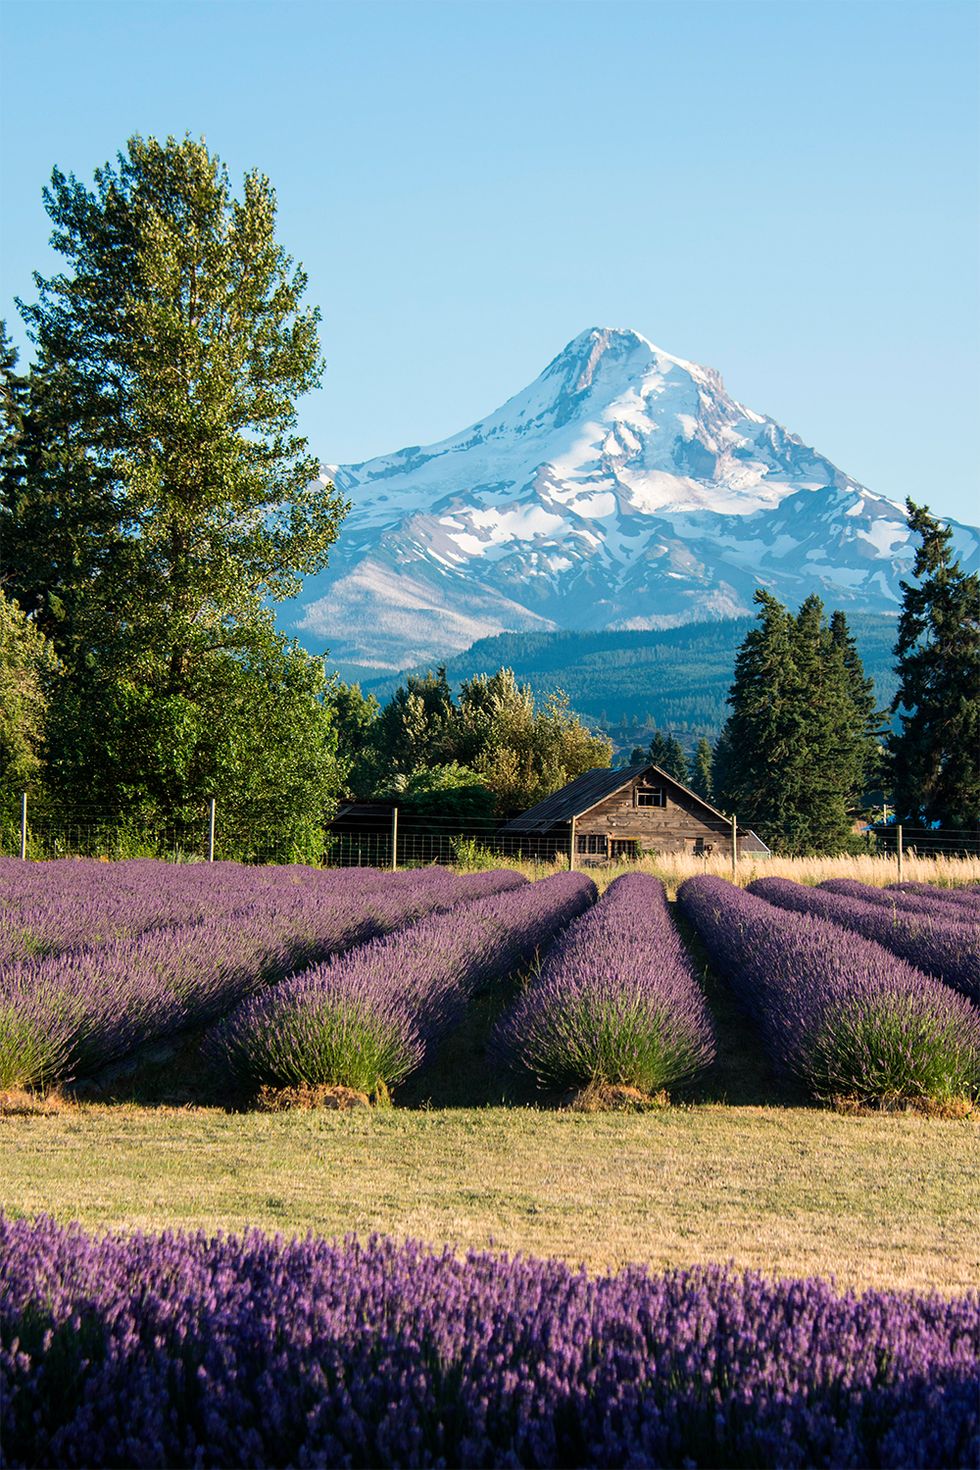 fields of lavender with a wooden house and a mountain peak behind them